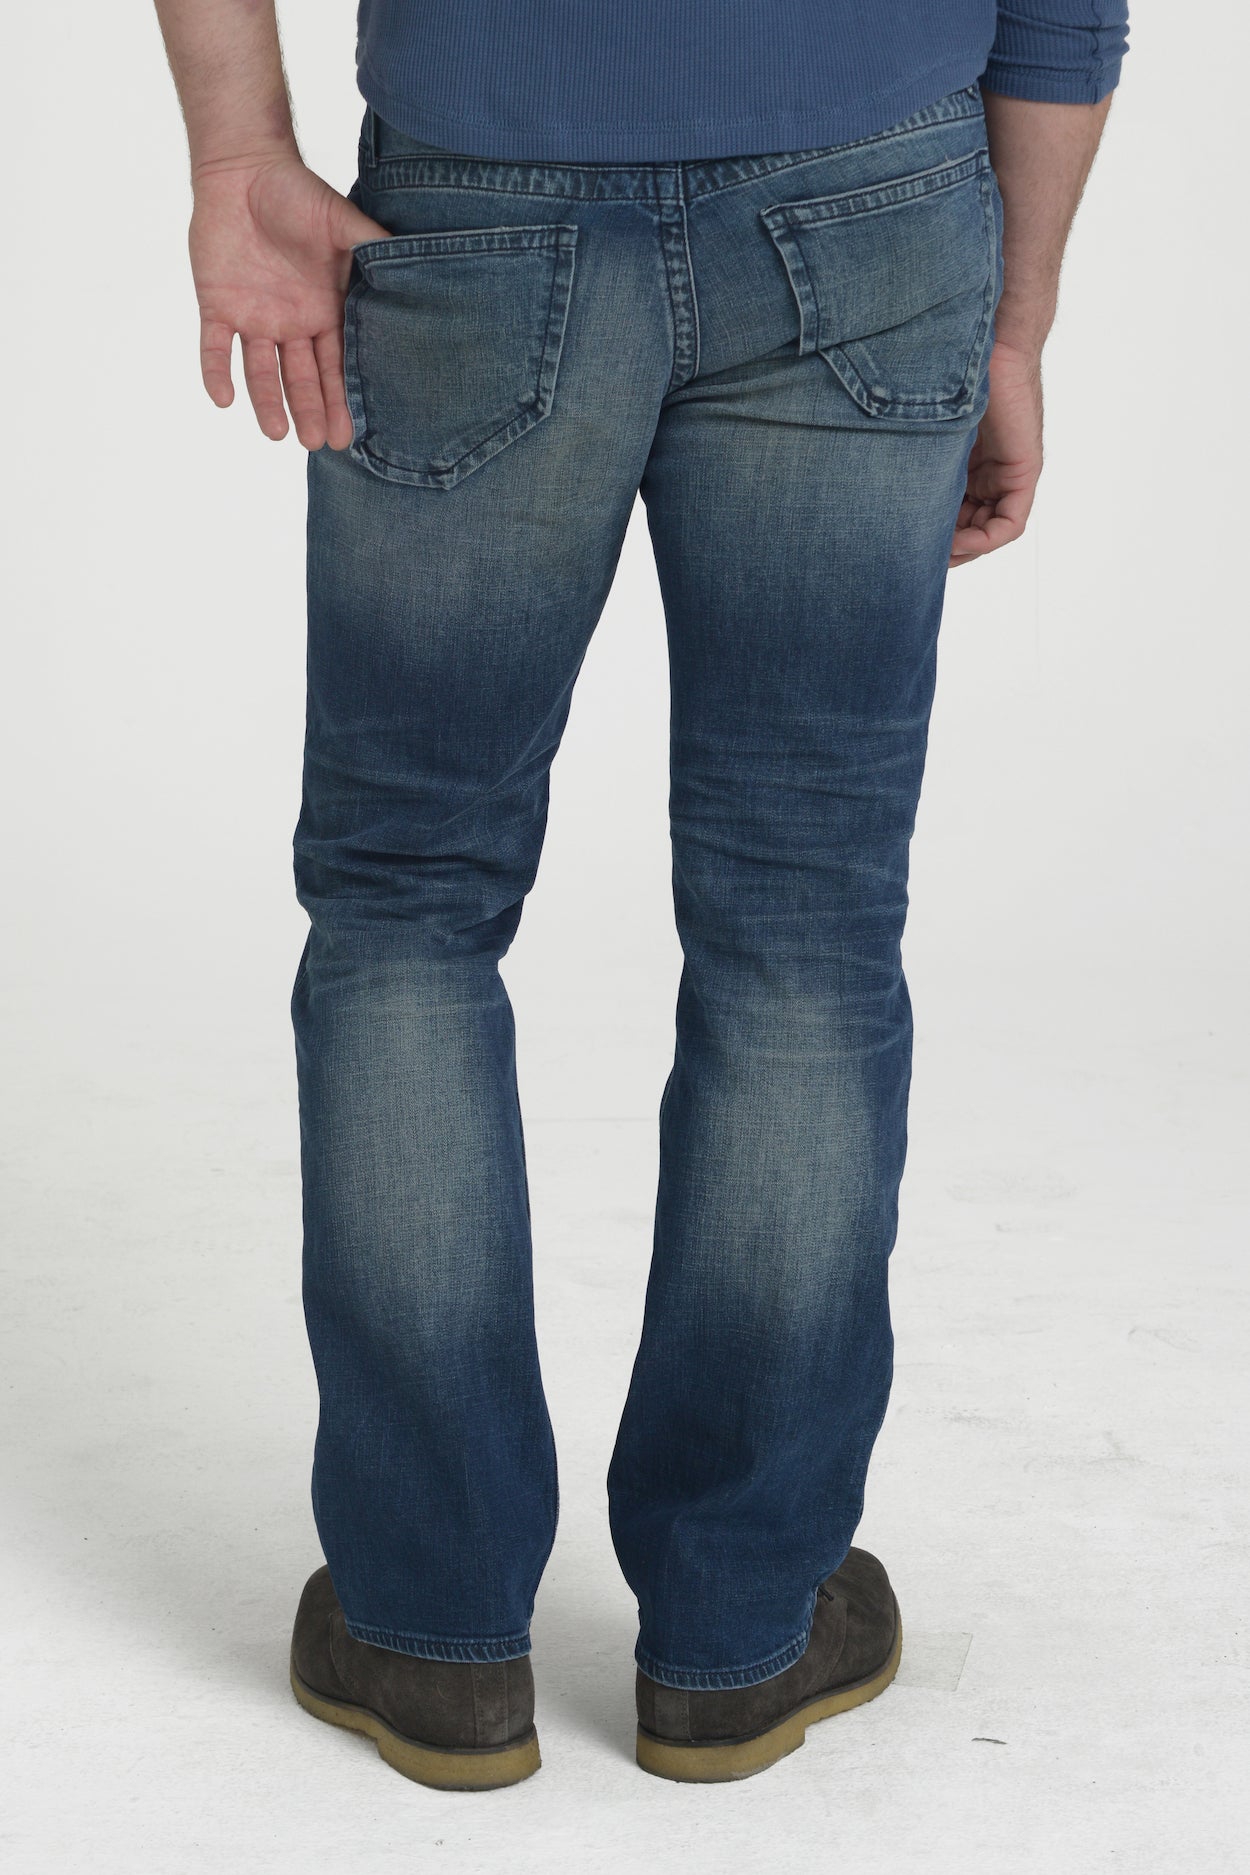 TEXAS STRAIGHT DENIM PANTS IN WASTED BLUES